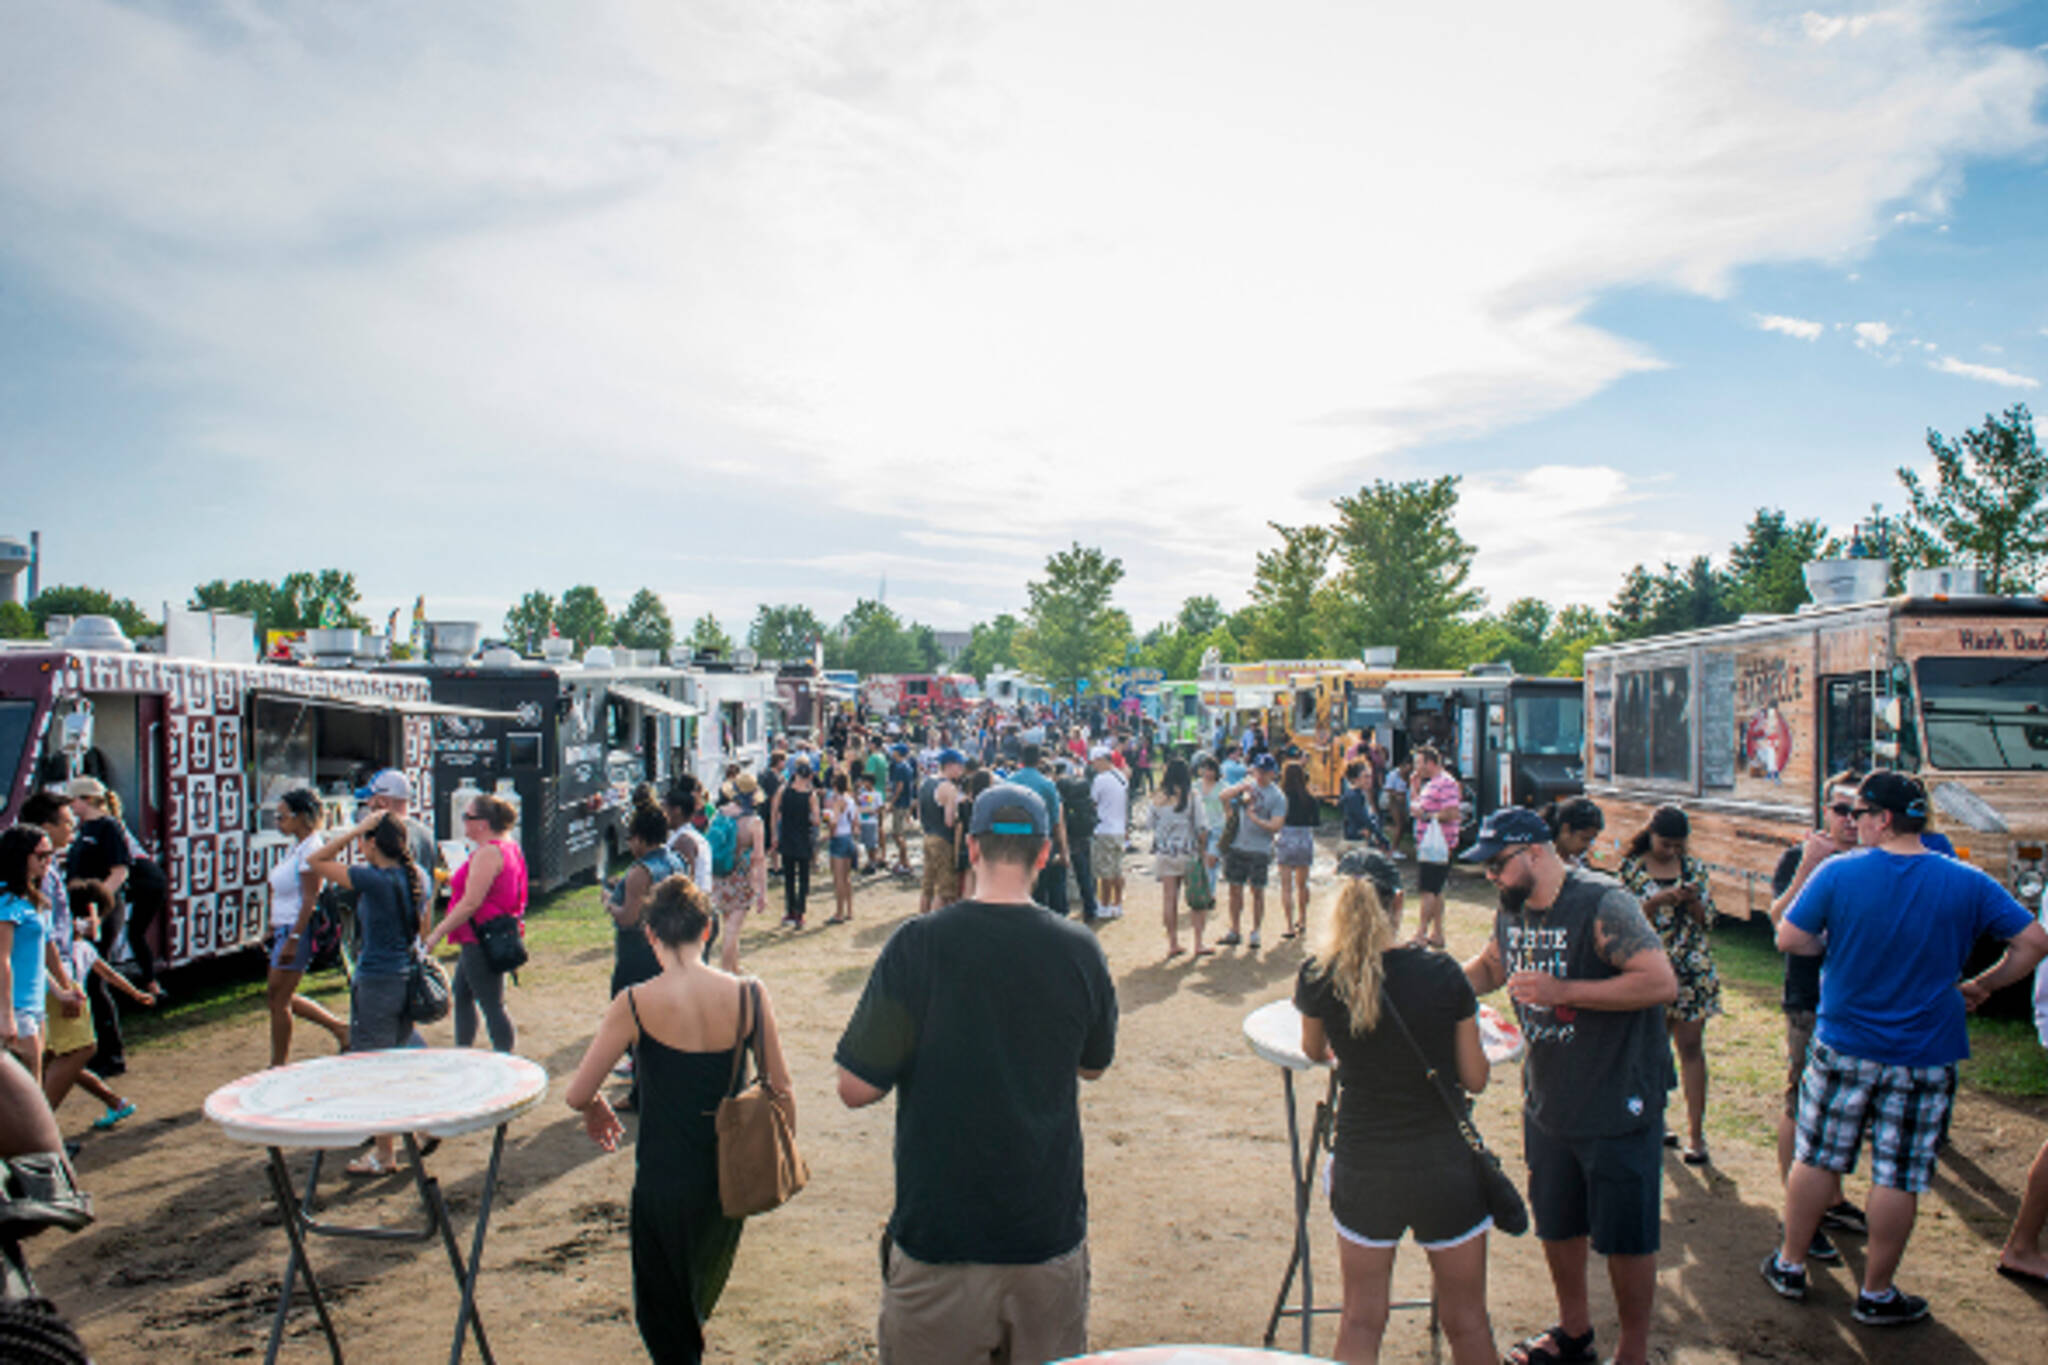 46 great eats from the Toronto Food Truck Festival